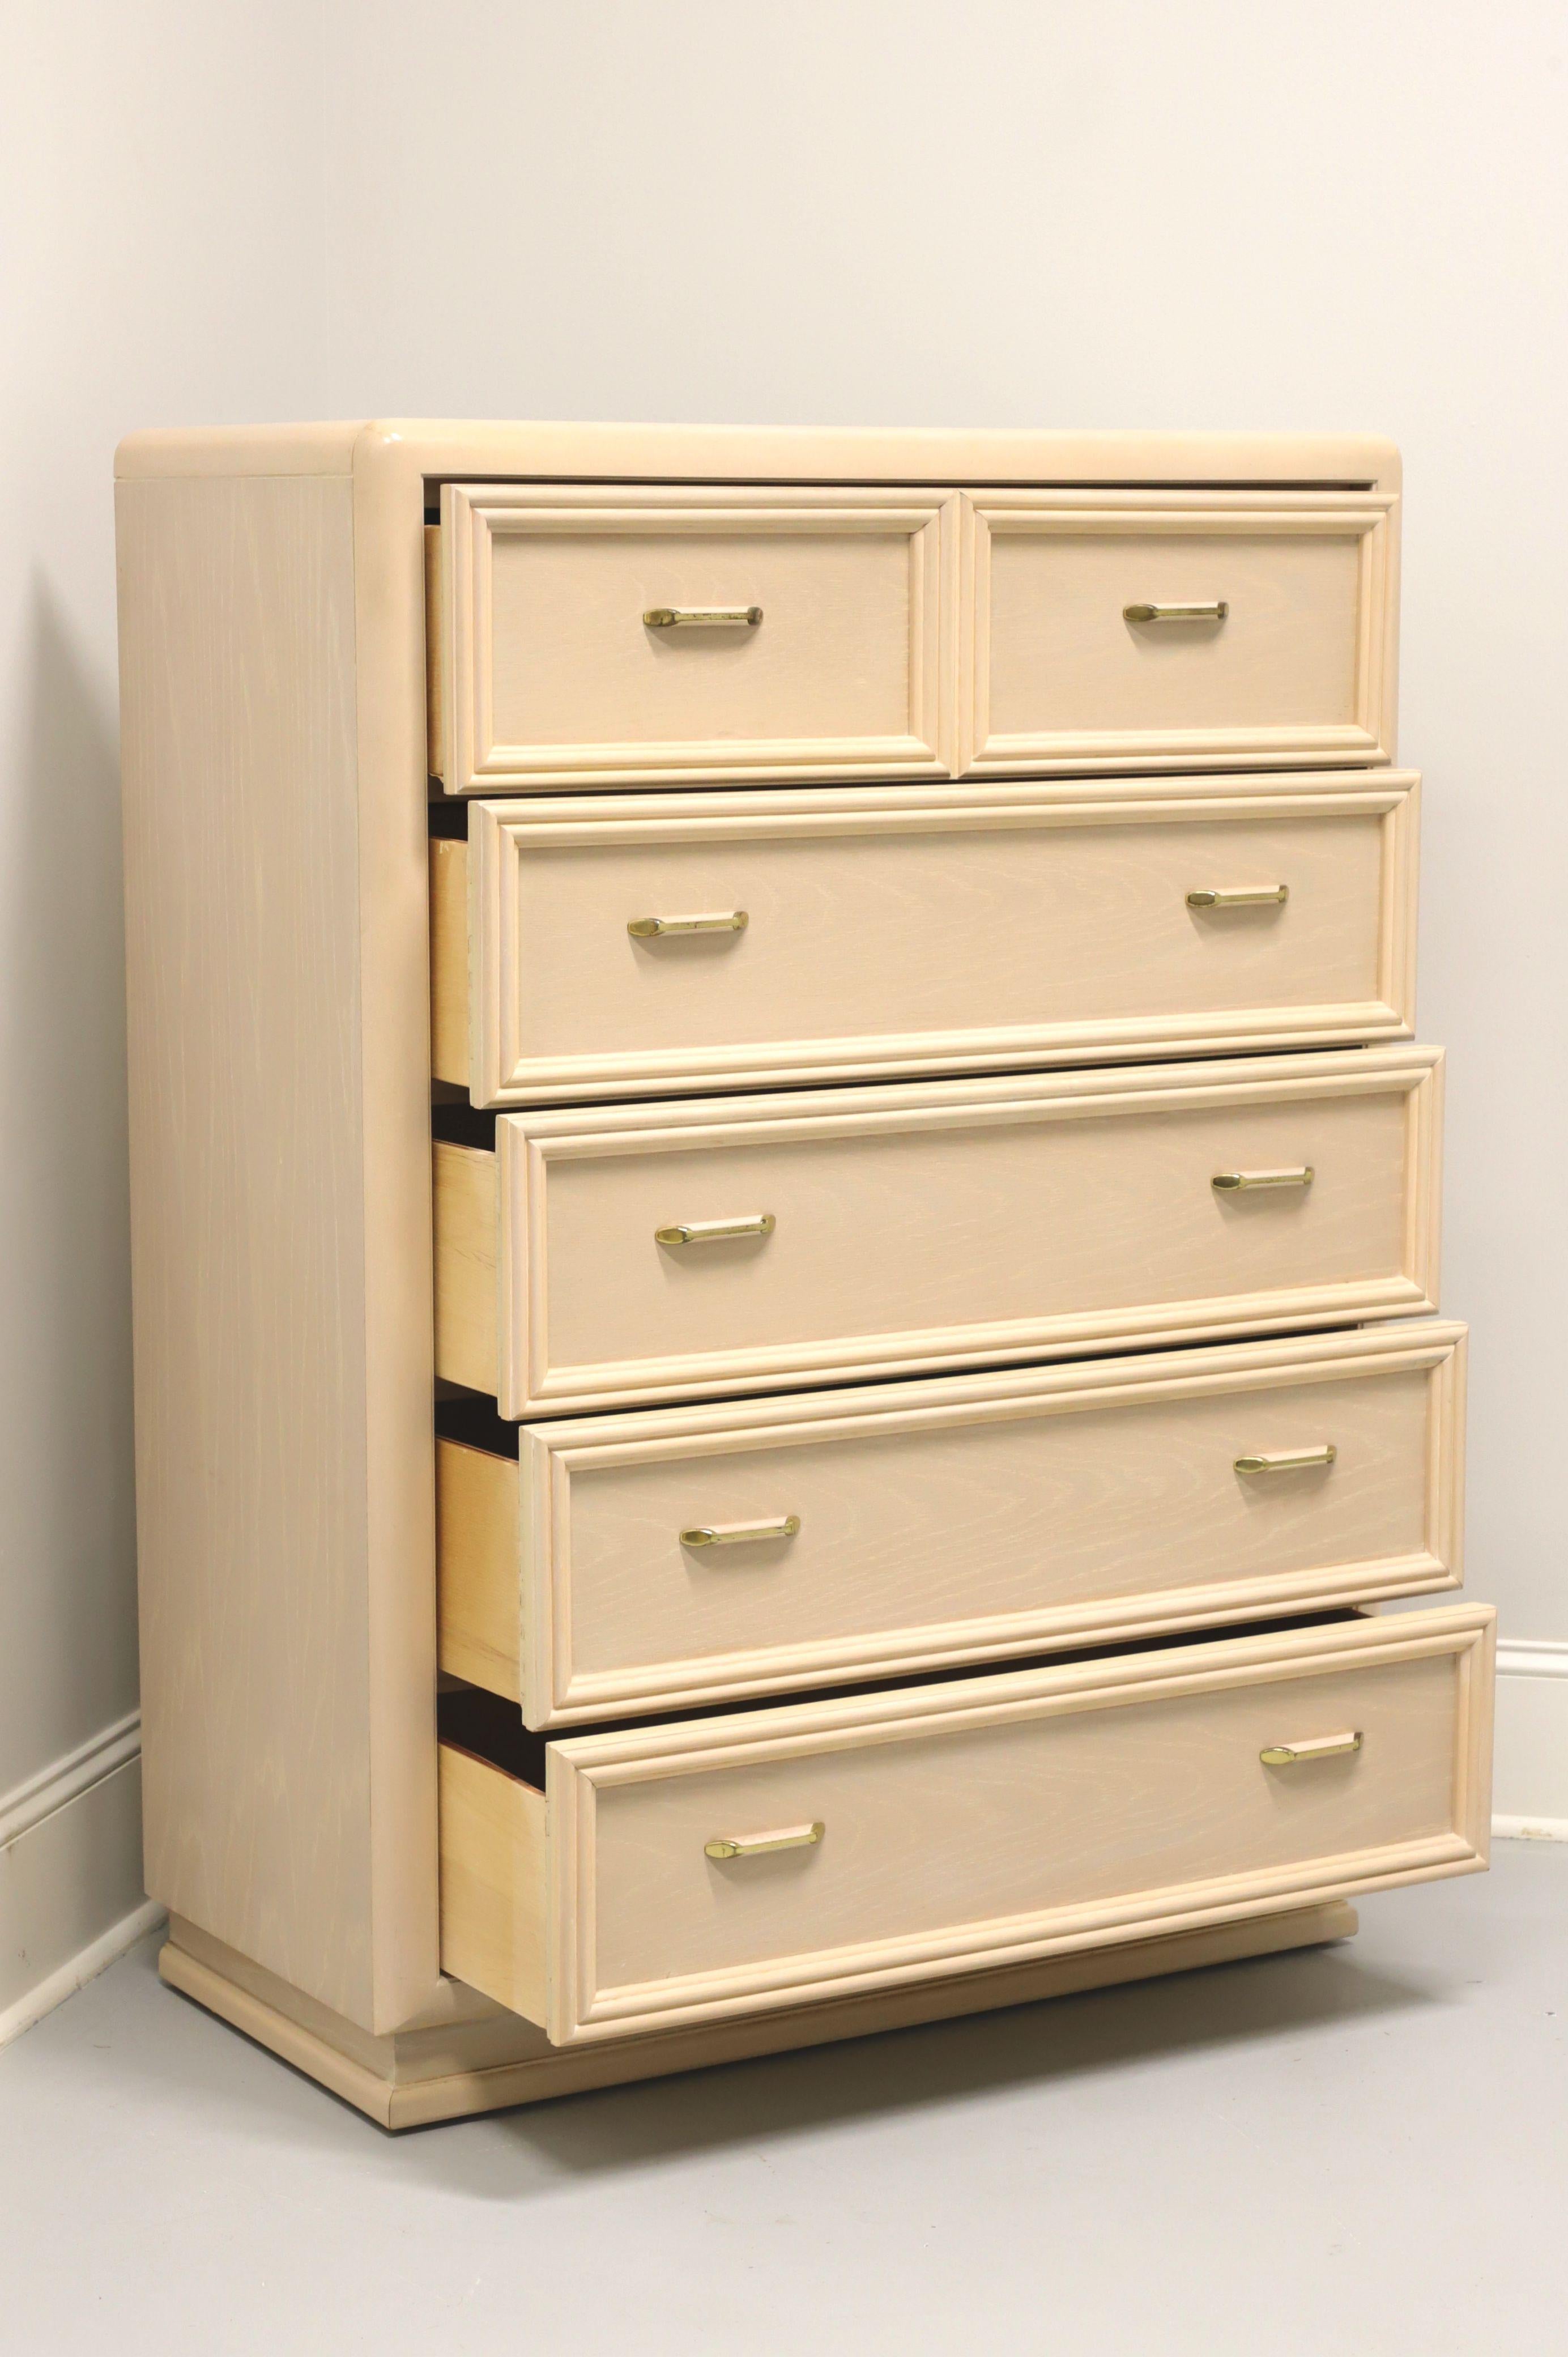 American THOMASVILLE Whitewashed Oak Post-Modern Chest of Drawers with Waterfall Edges